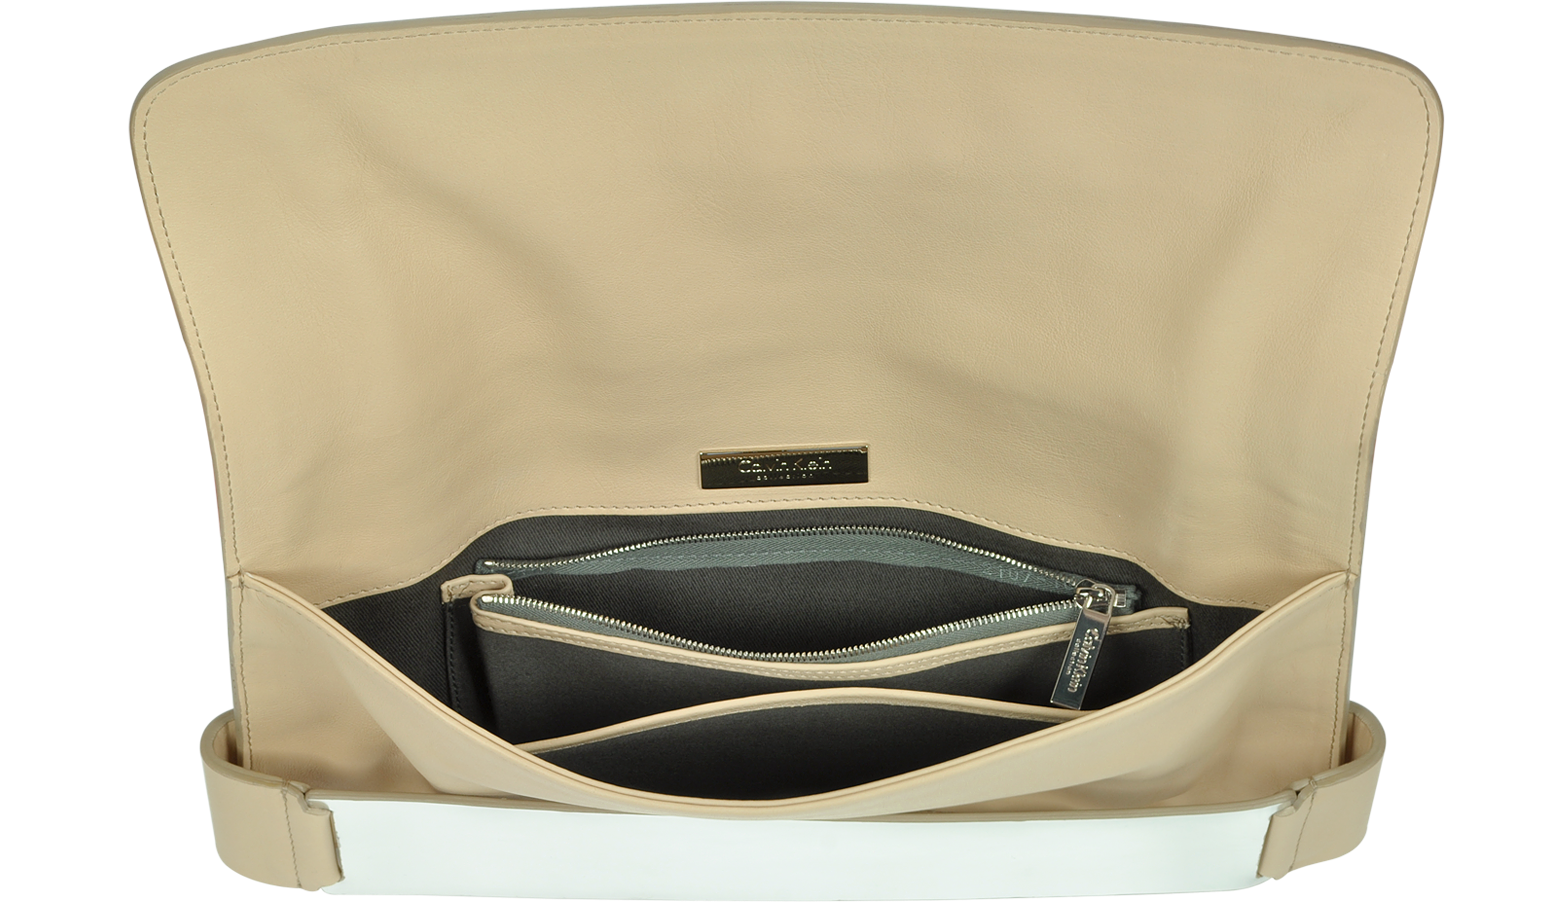 Calvin Klein Collection Large Leather Clutch at FORZIERI Canada